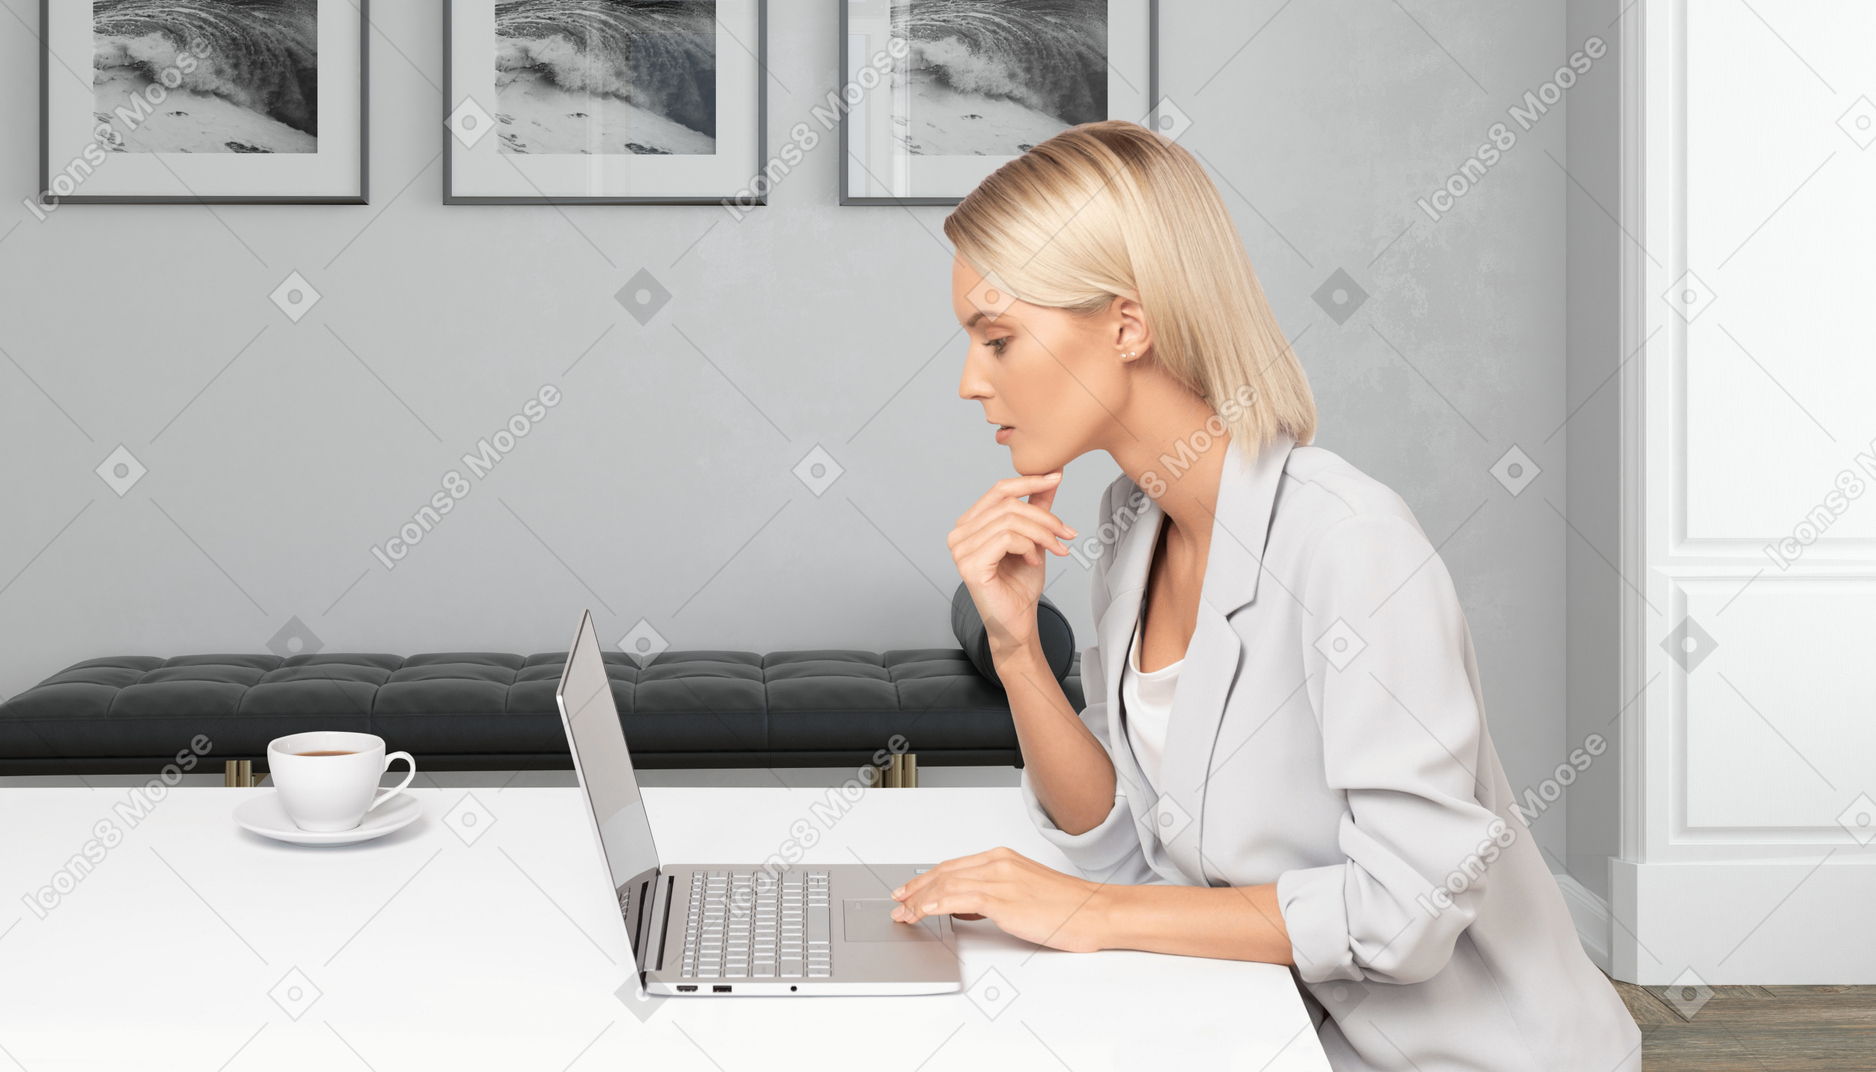 A woman sitting at a table using a laptop computer